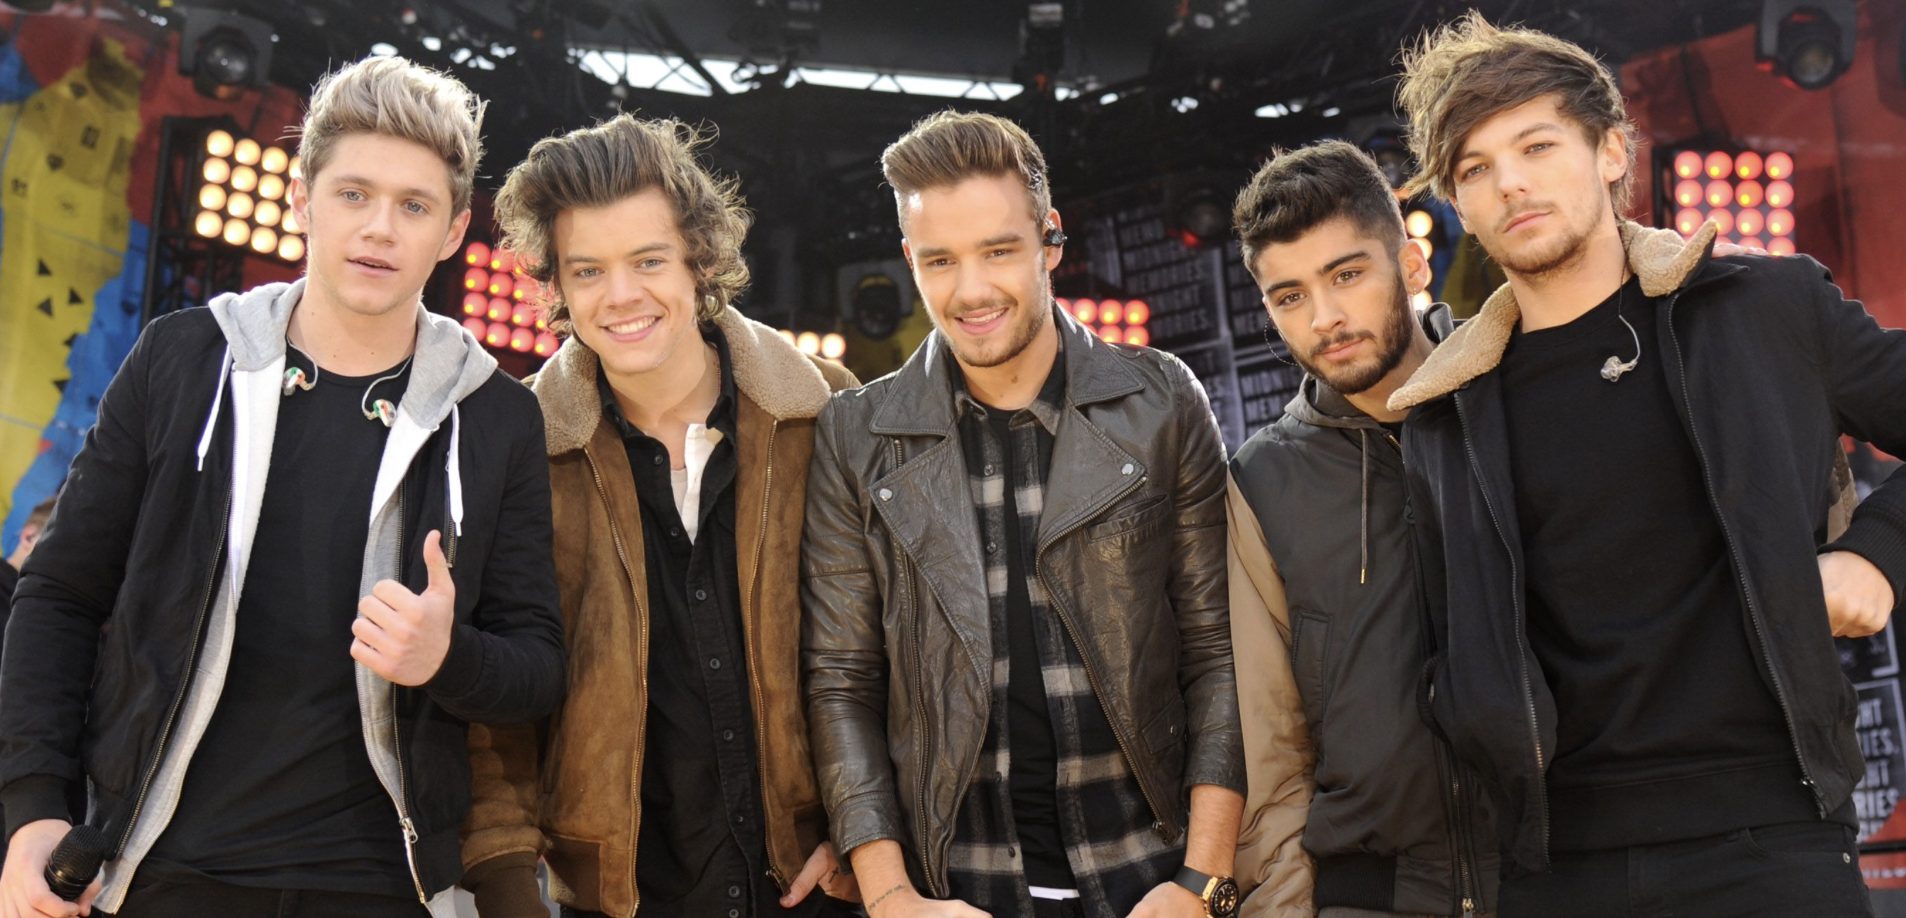 One Direction Made “History” – And You Know It - Platform Magazine